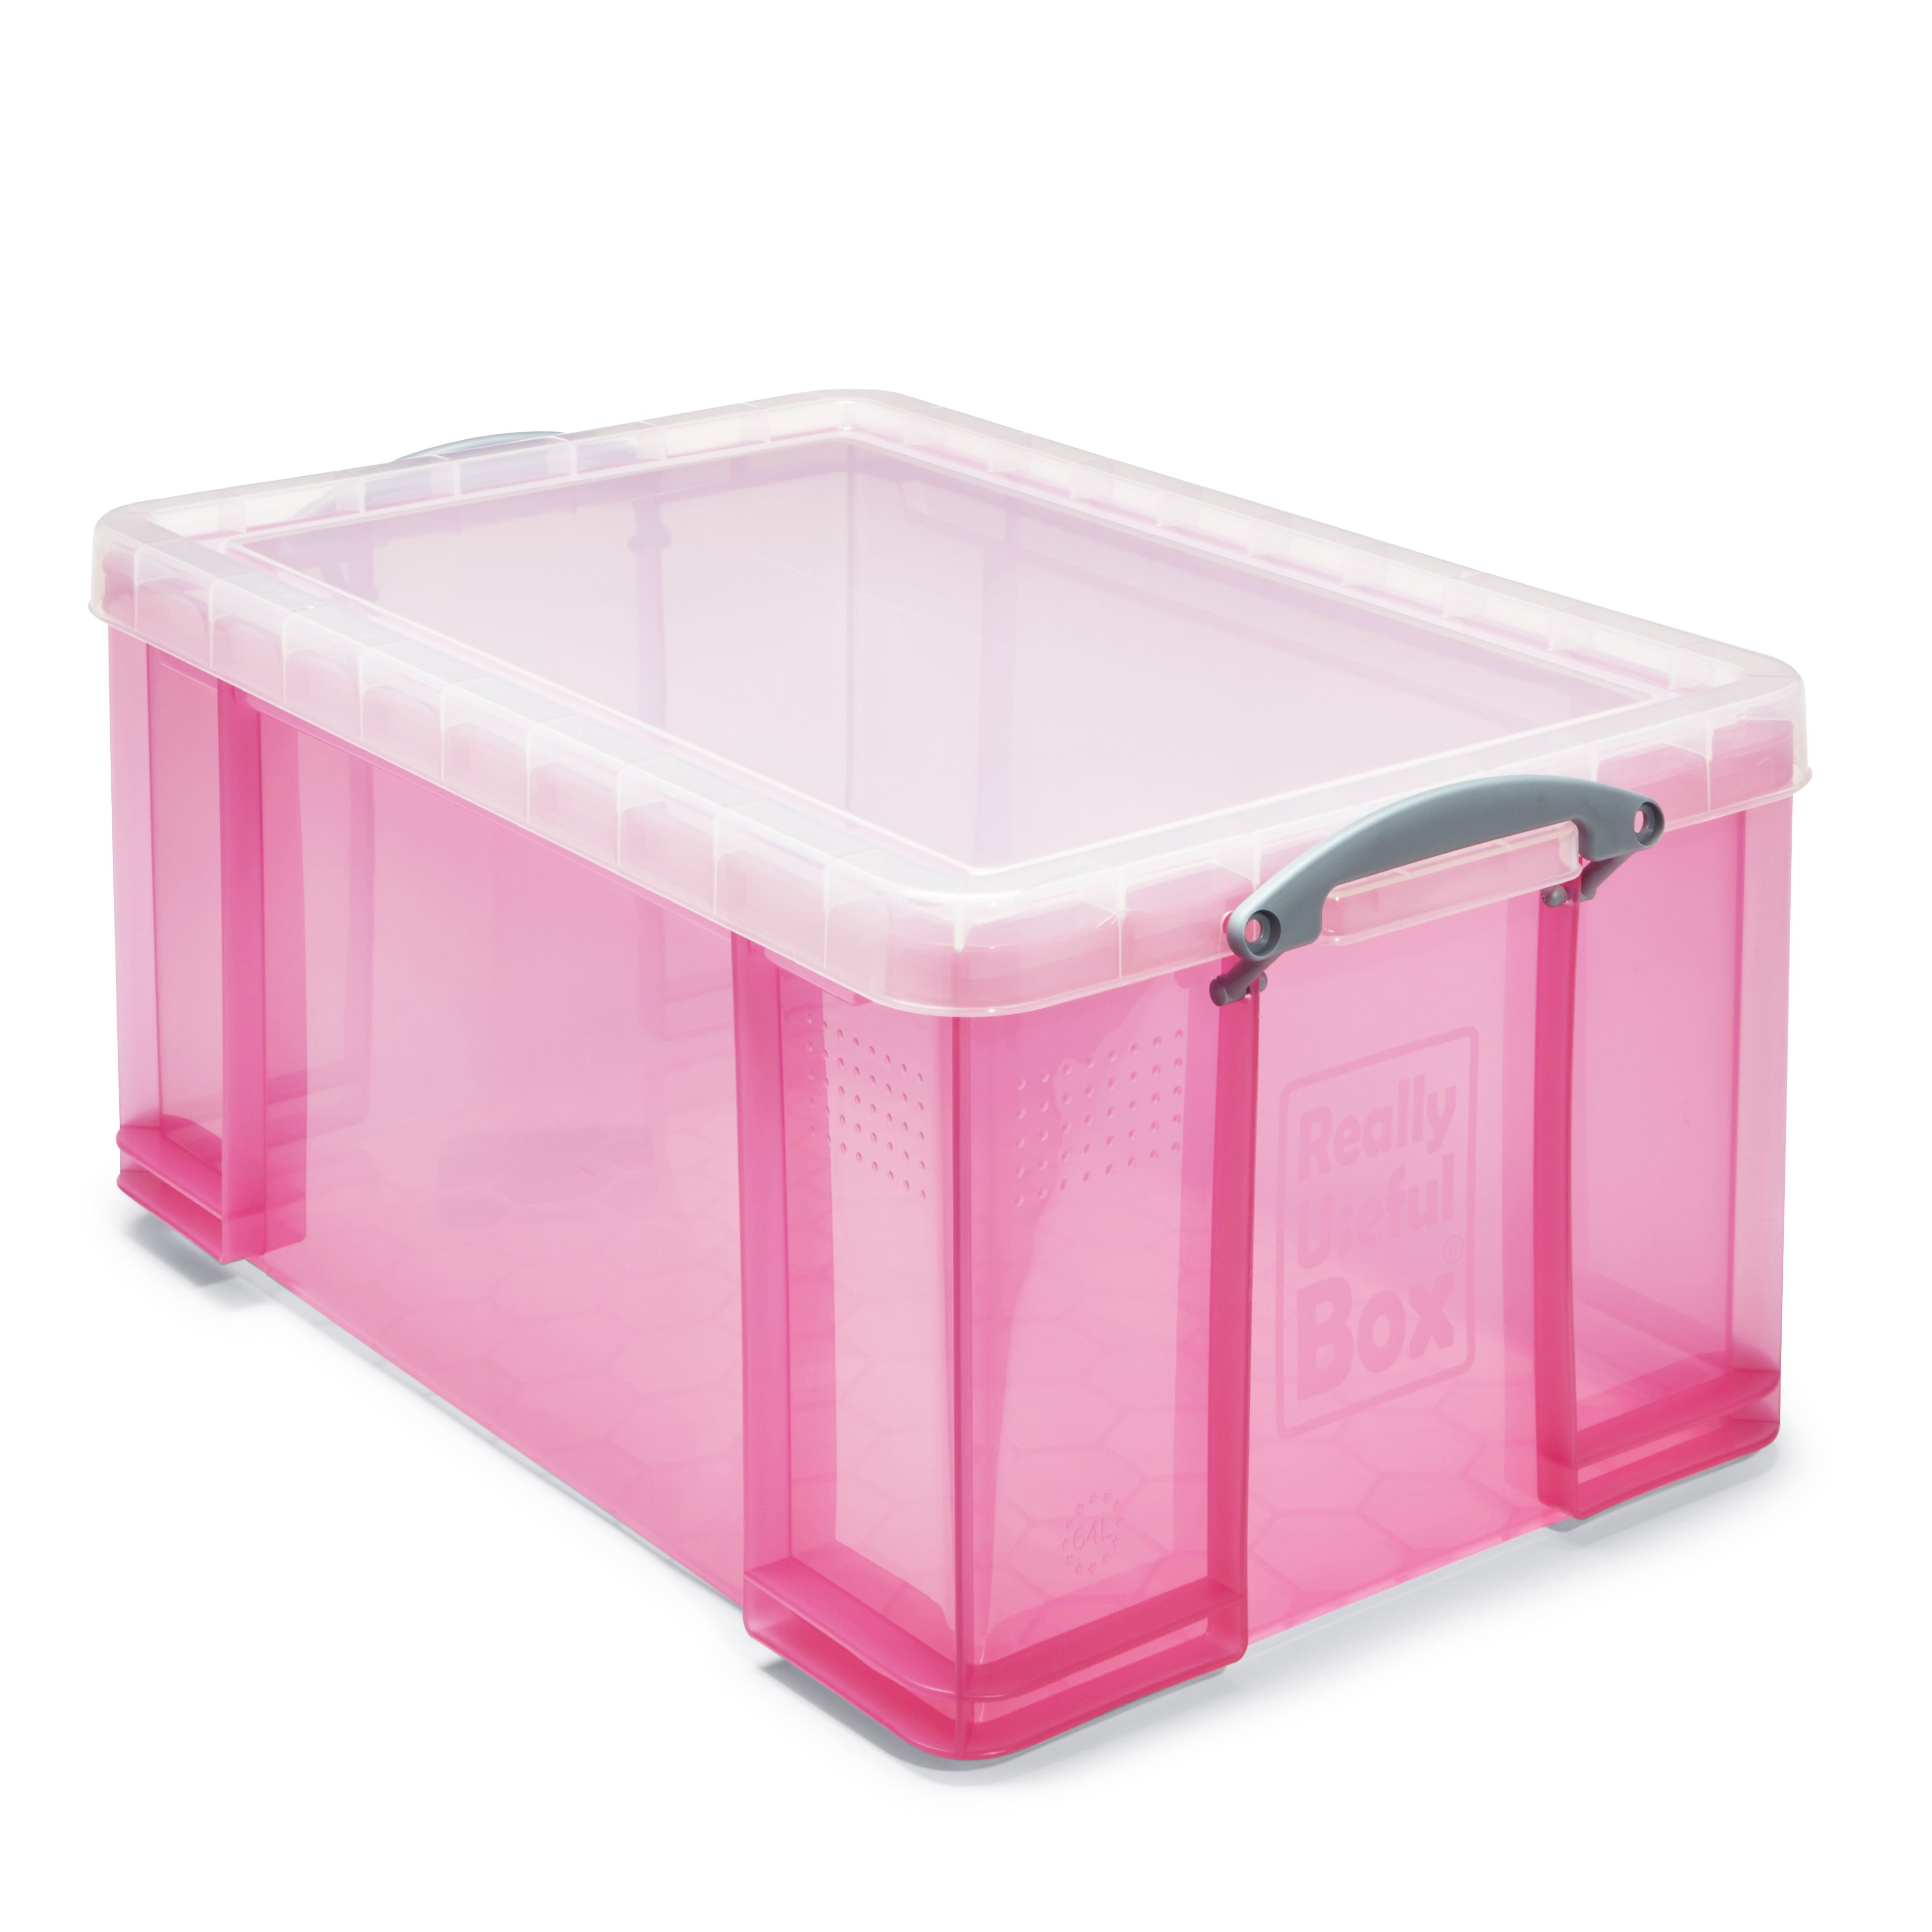 Allstore Heavy duty 54L Large Plastic Stackable Storage box with